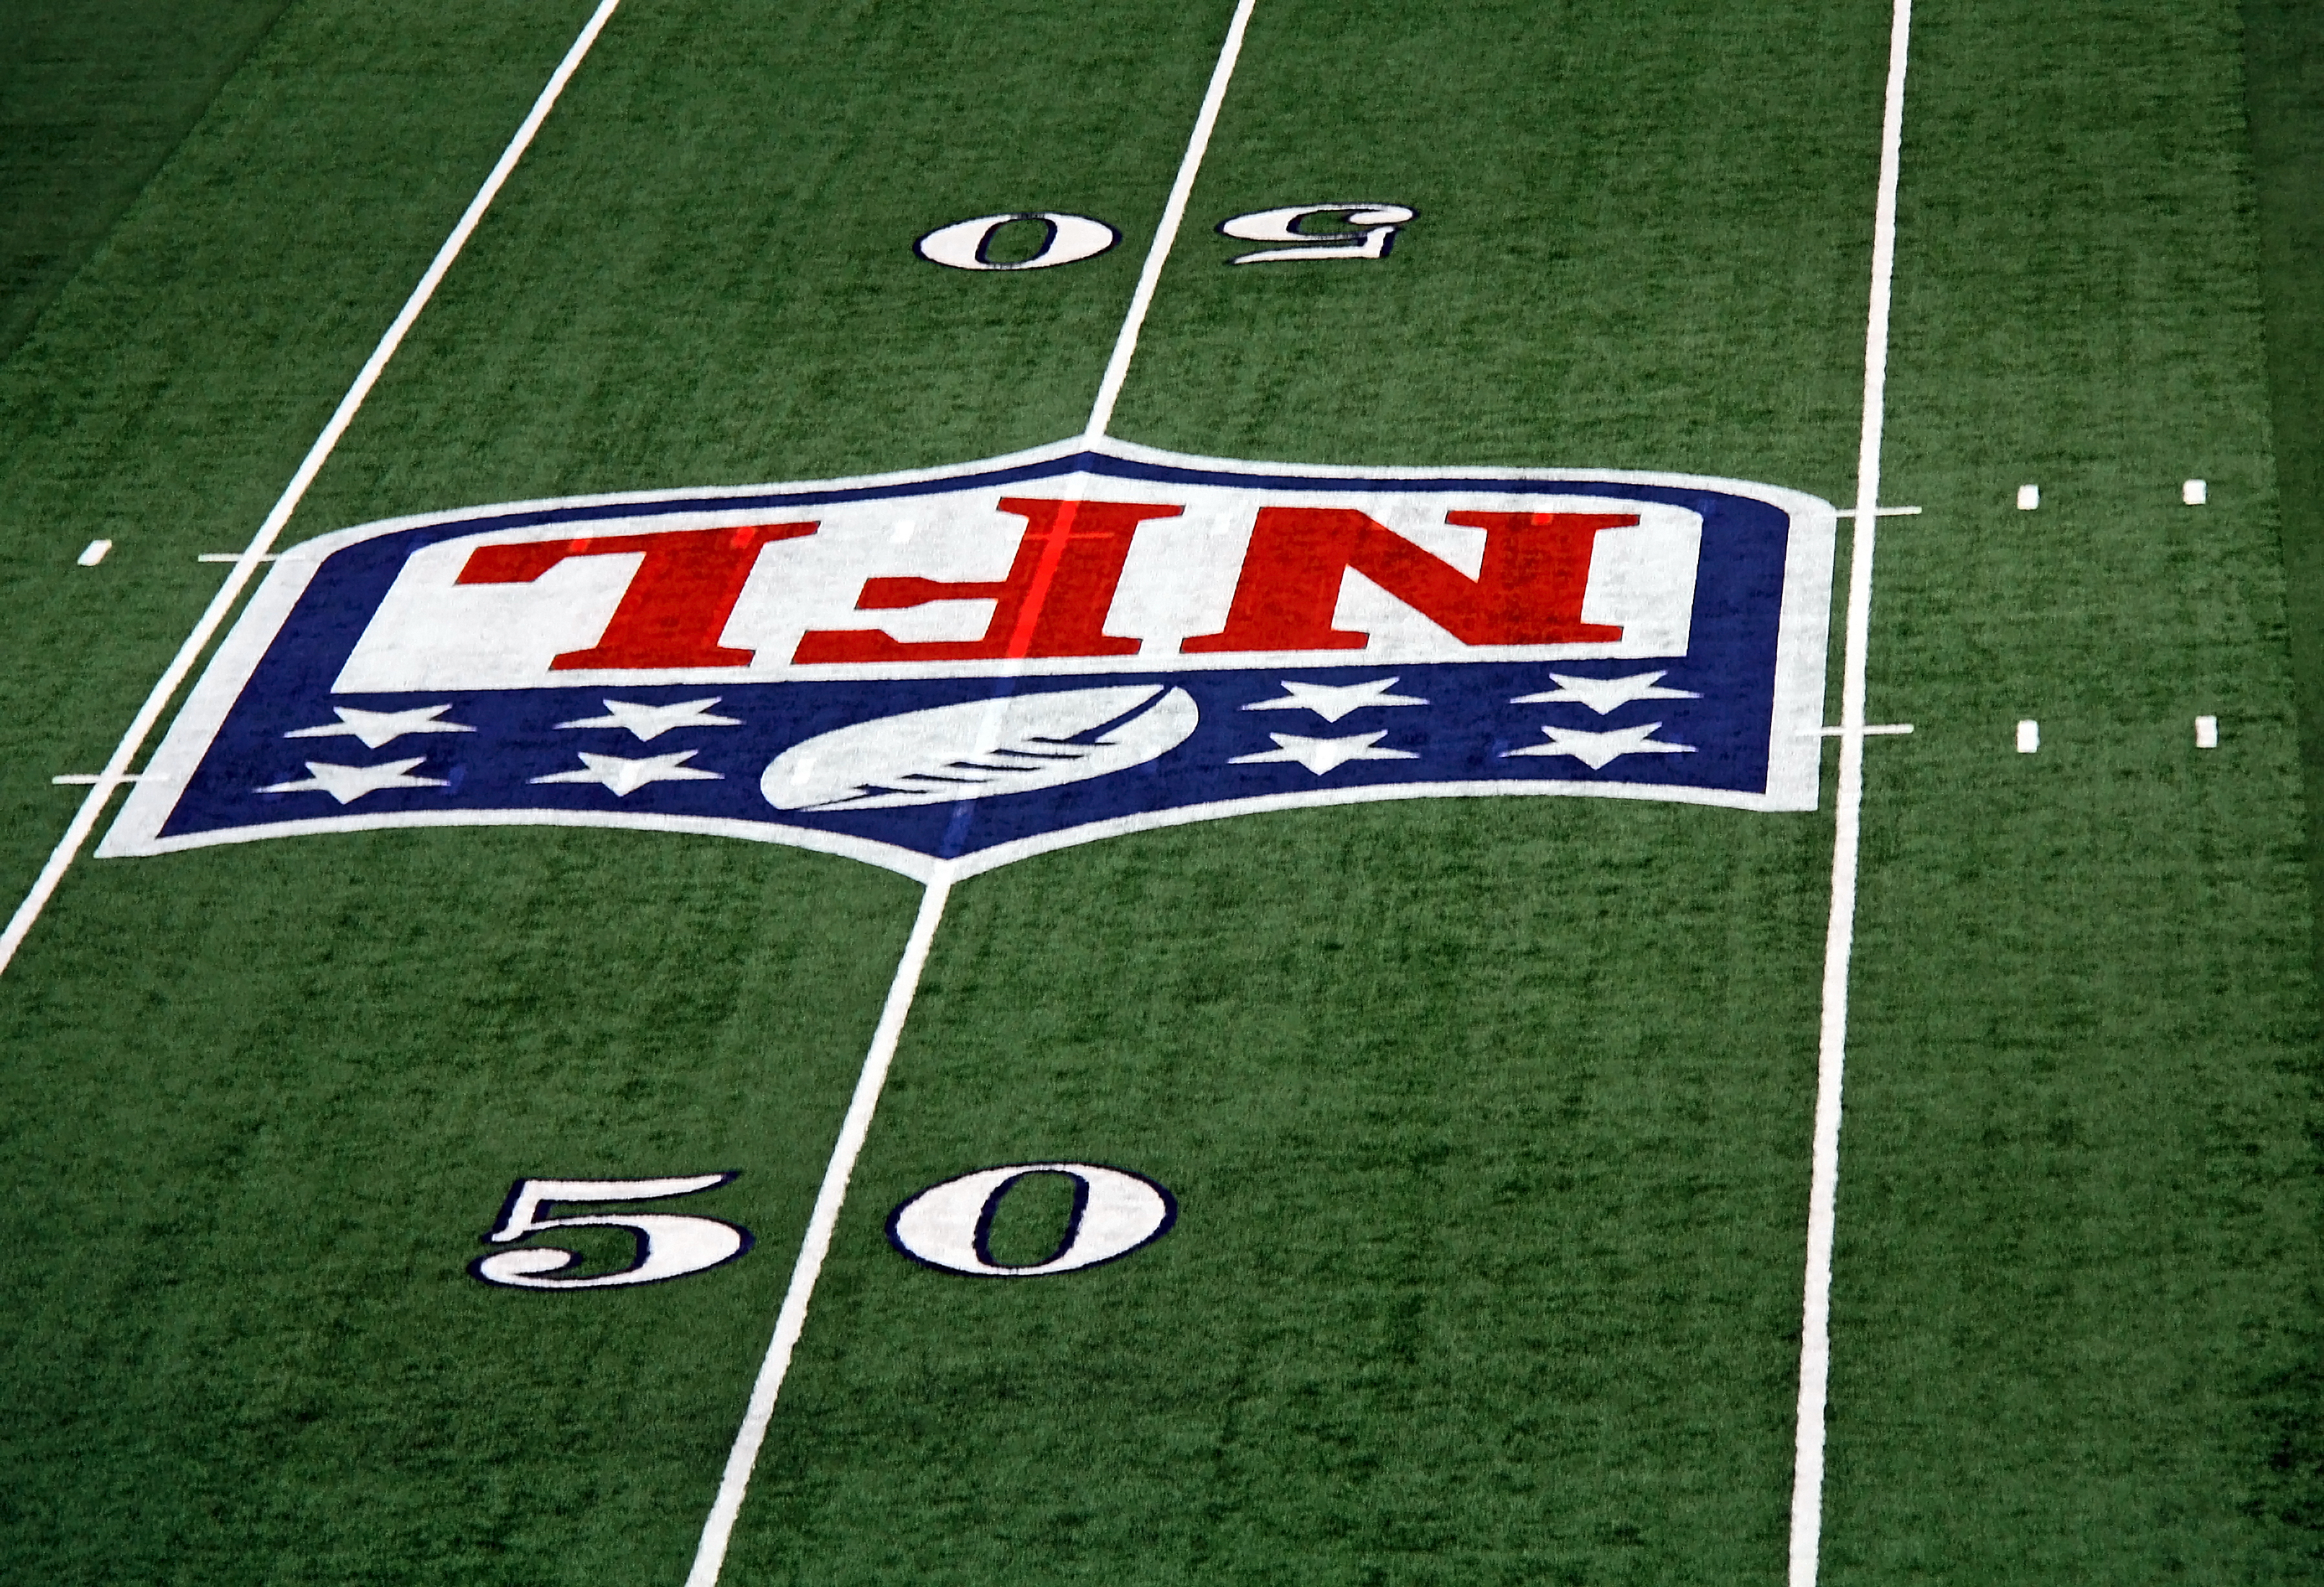 a football field with numbers and logo